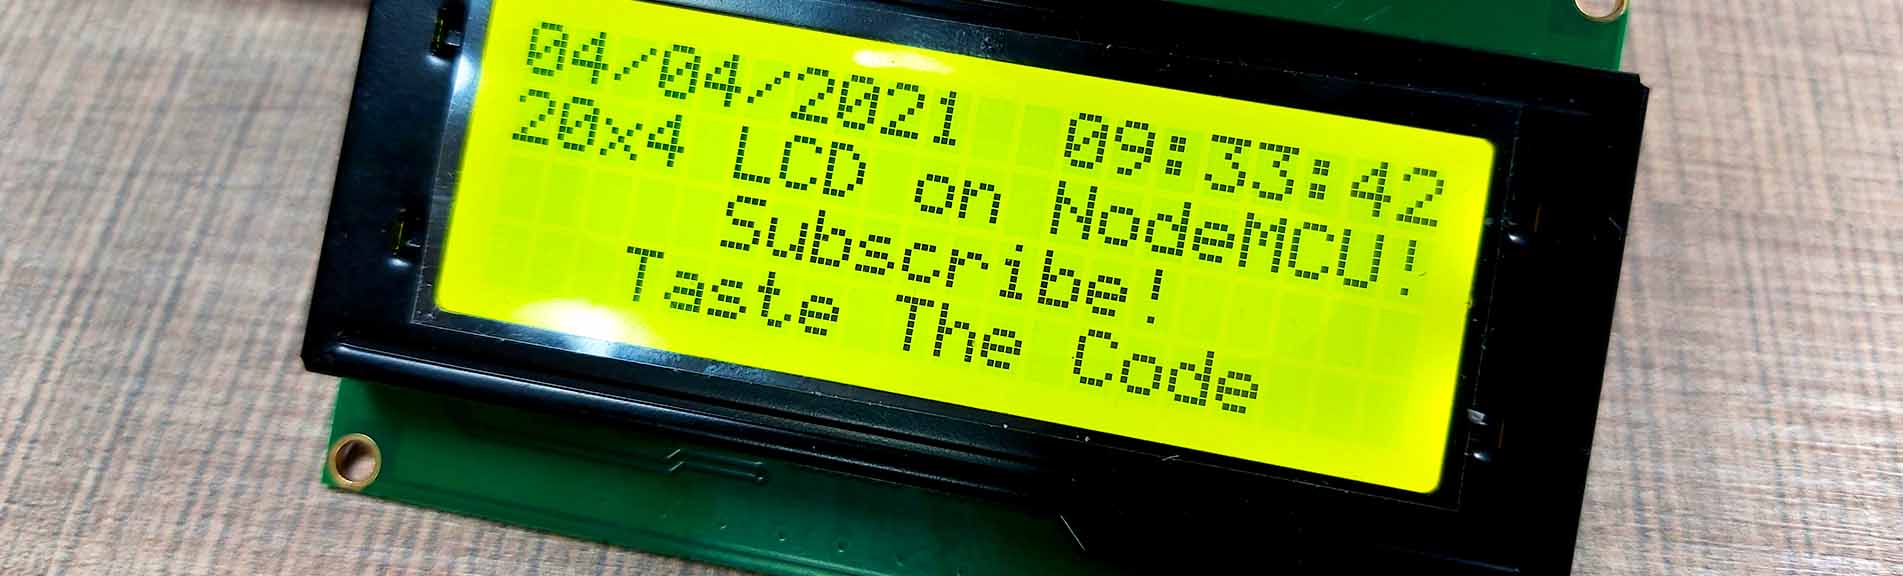 Adding liquid crystal display (LCD) to Arduino projects